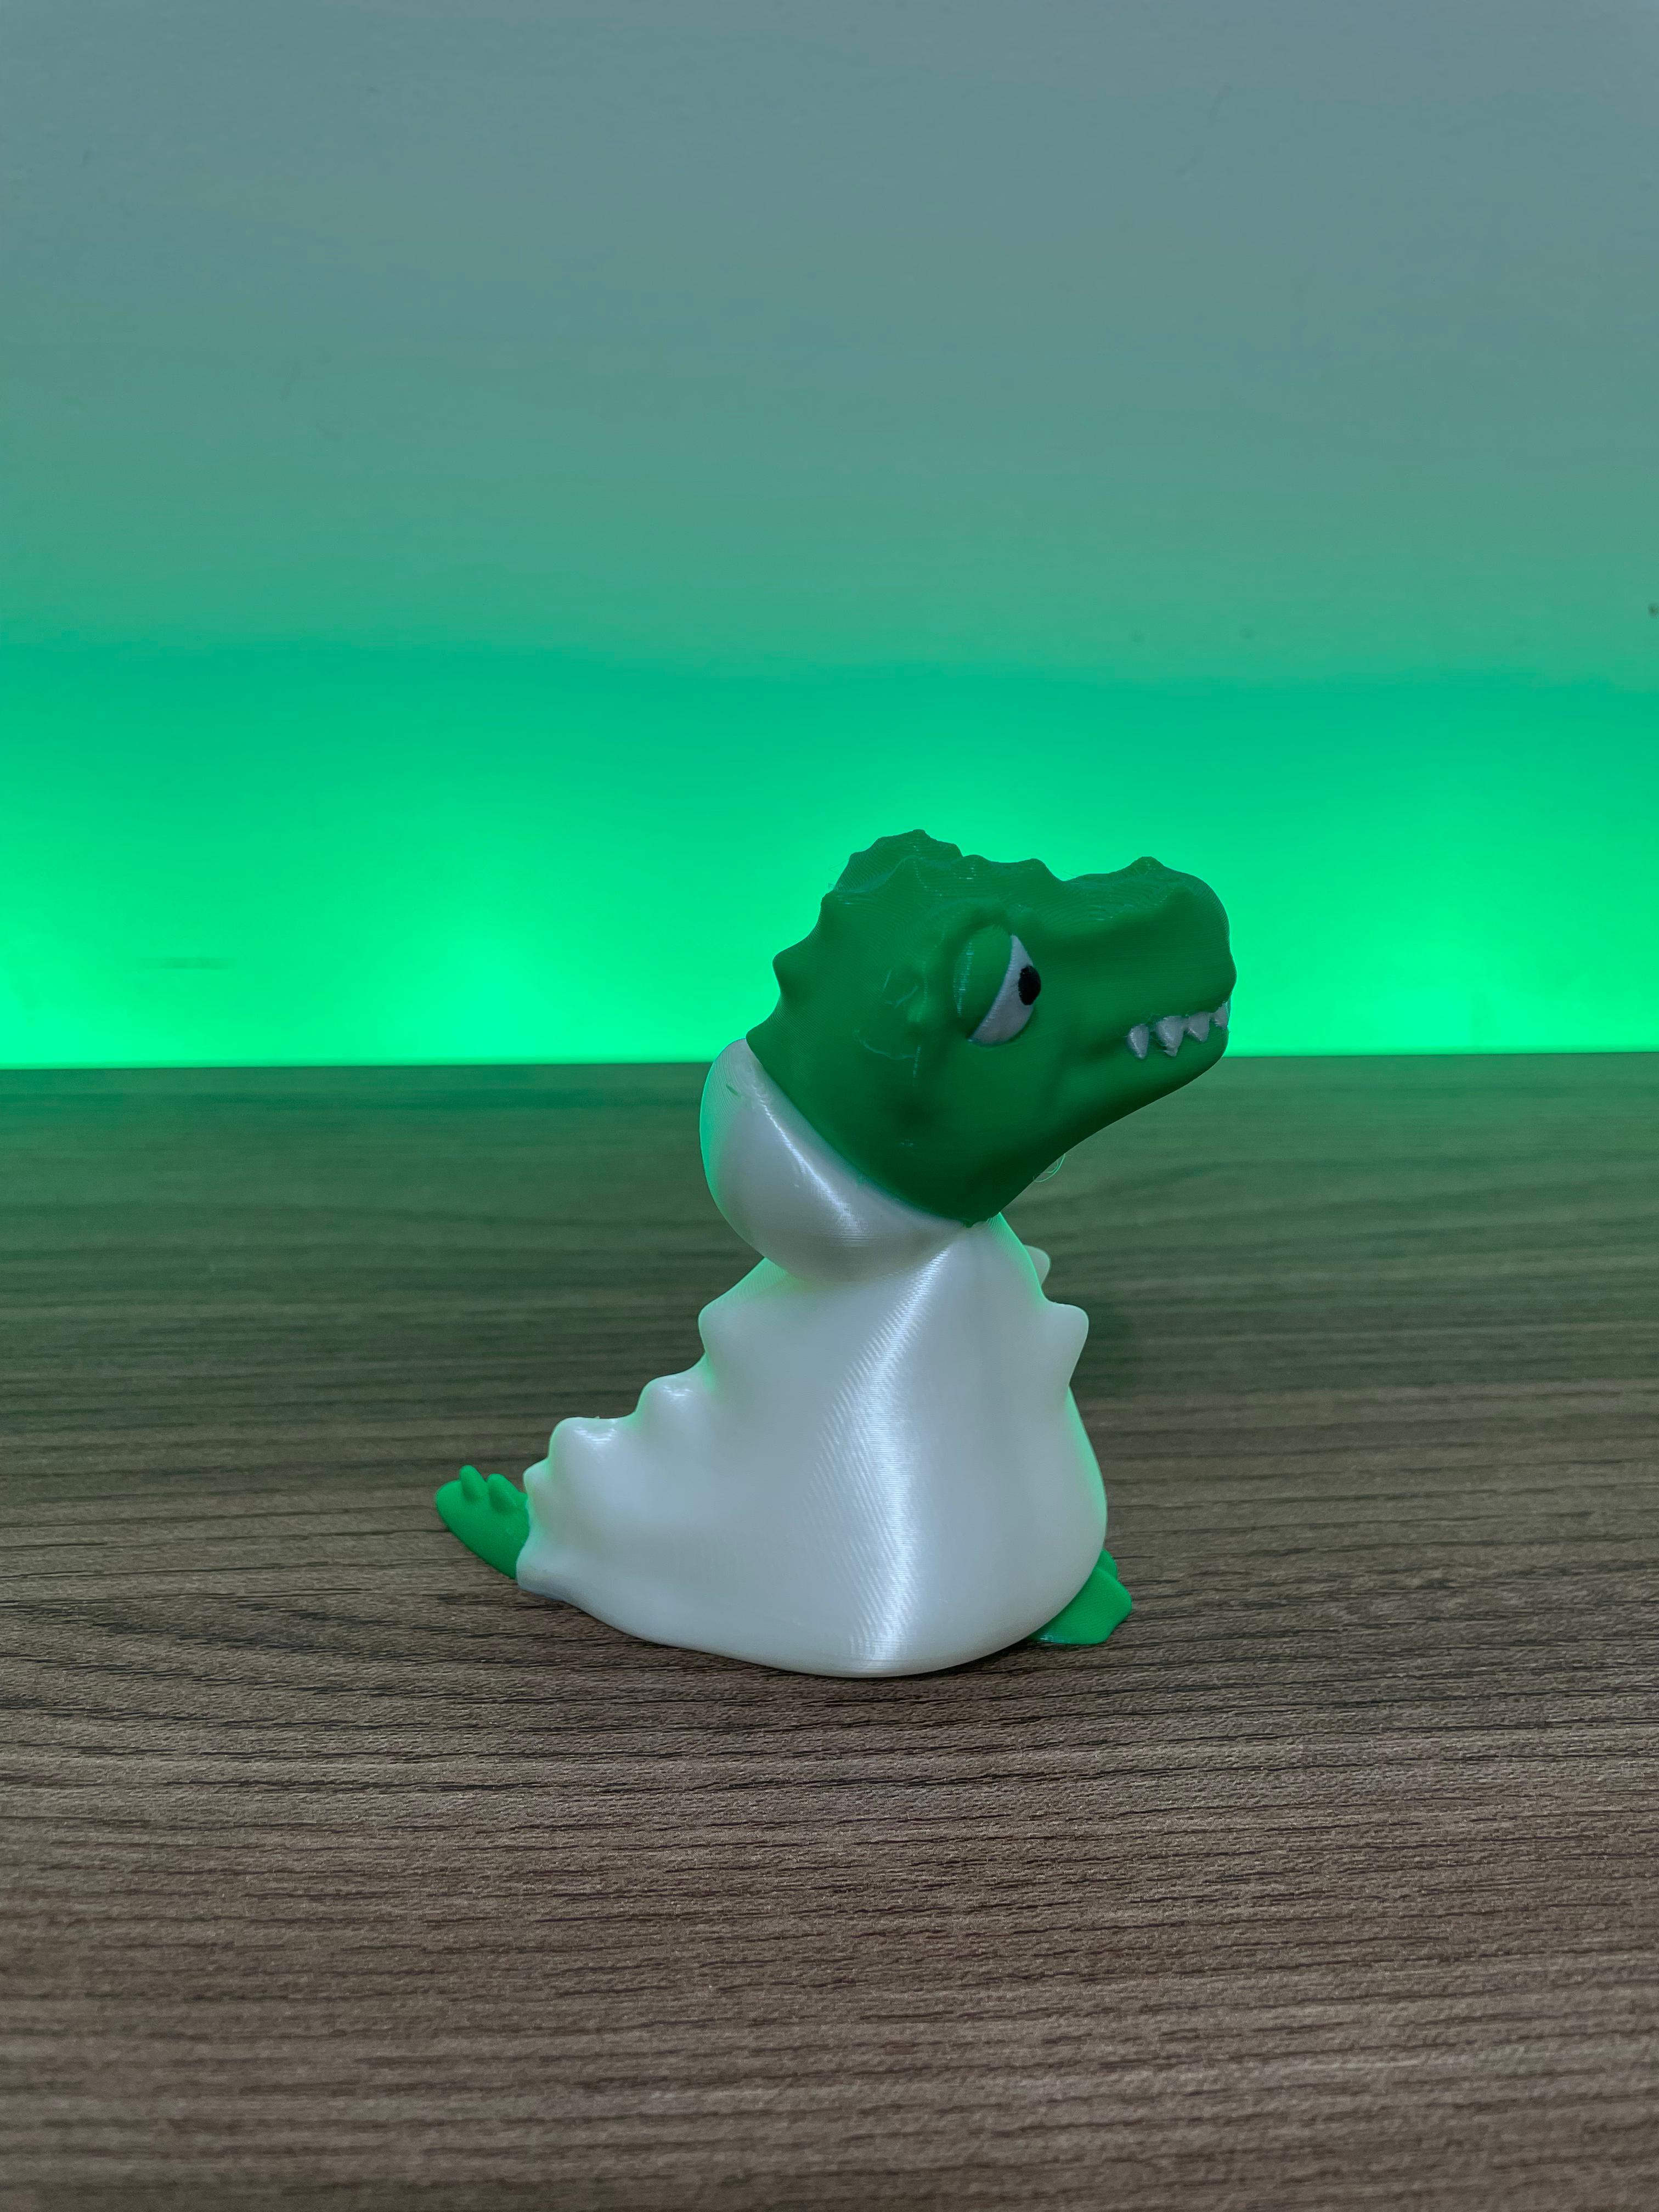 Cute T Rex Dinossaur with Ghost Costume 3d model